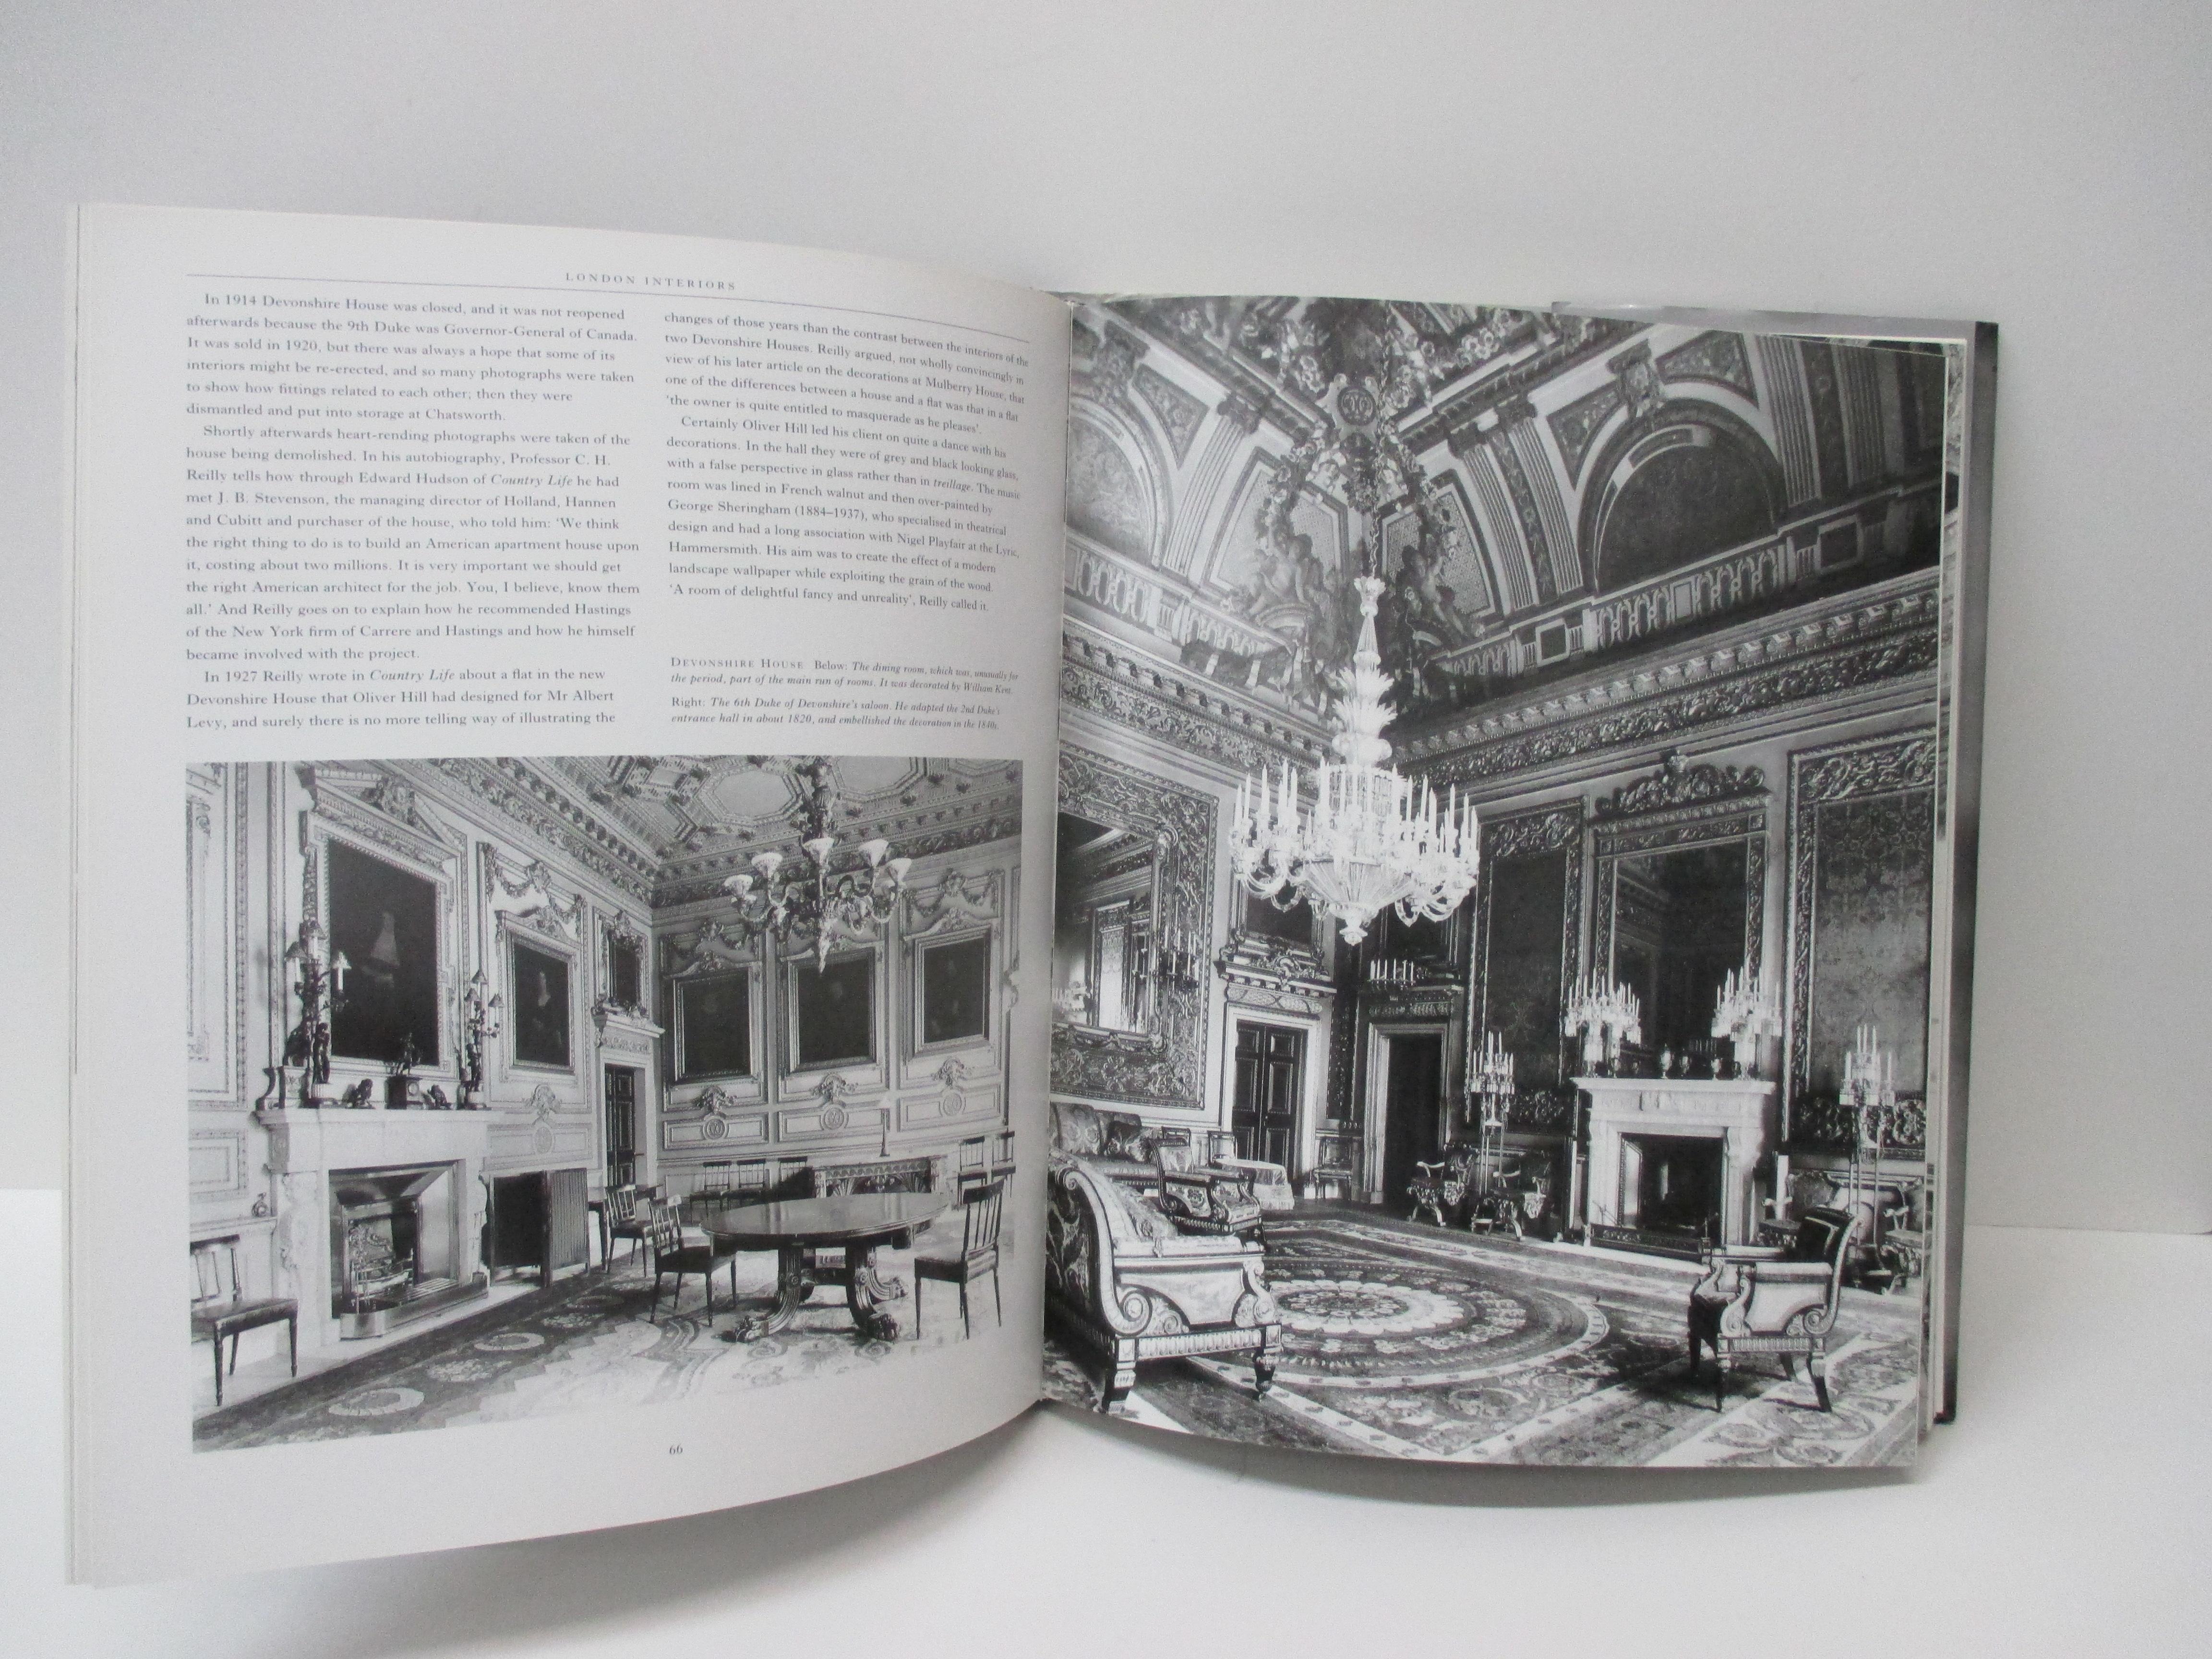 London interiors hardcover decoration book
London's historic houses and domestic interiors have suffered greater loss and change than most of their Provincial counterparts due to political and social change, war, and a tradition of continuous